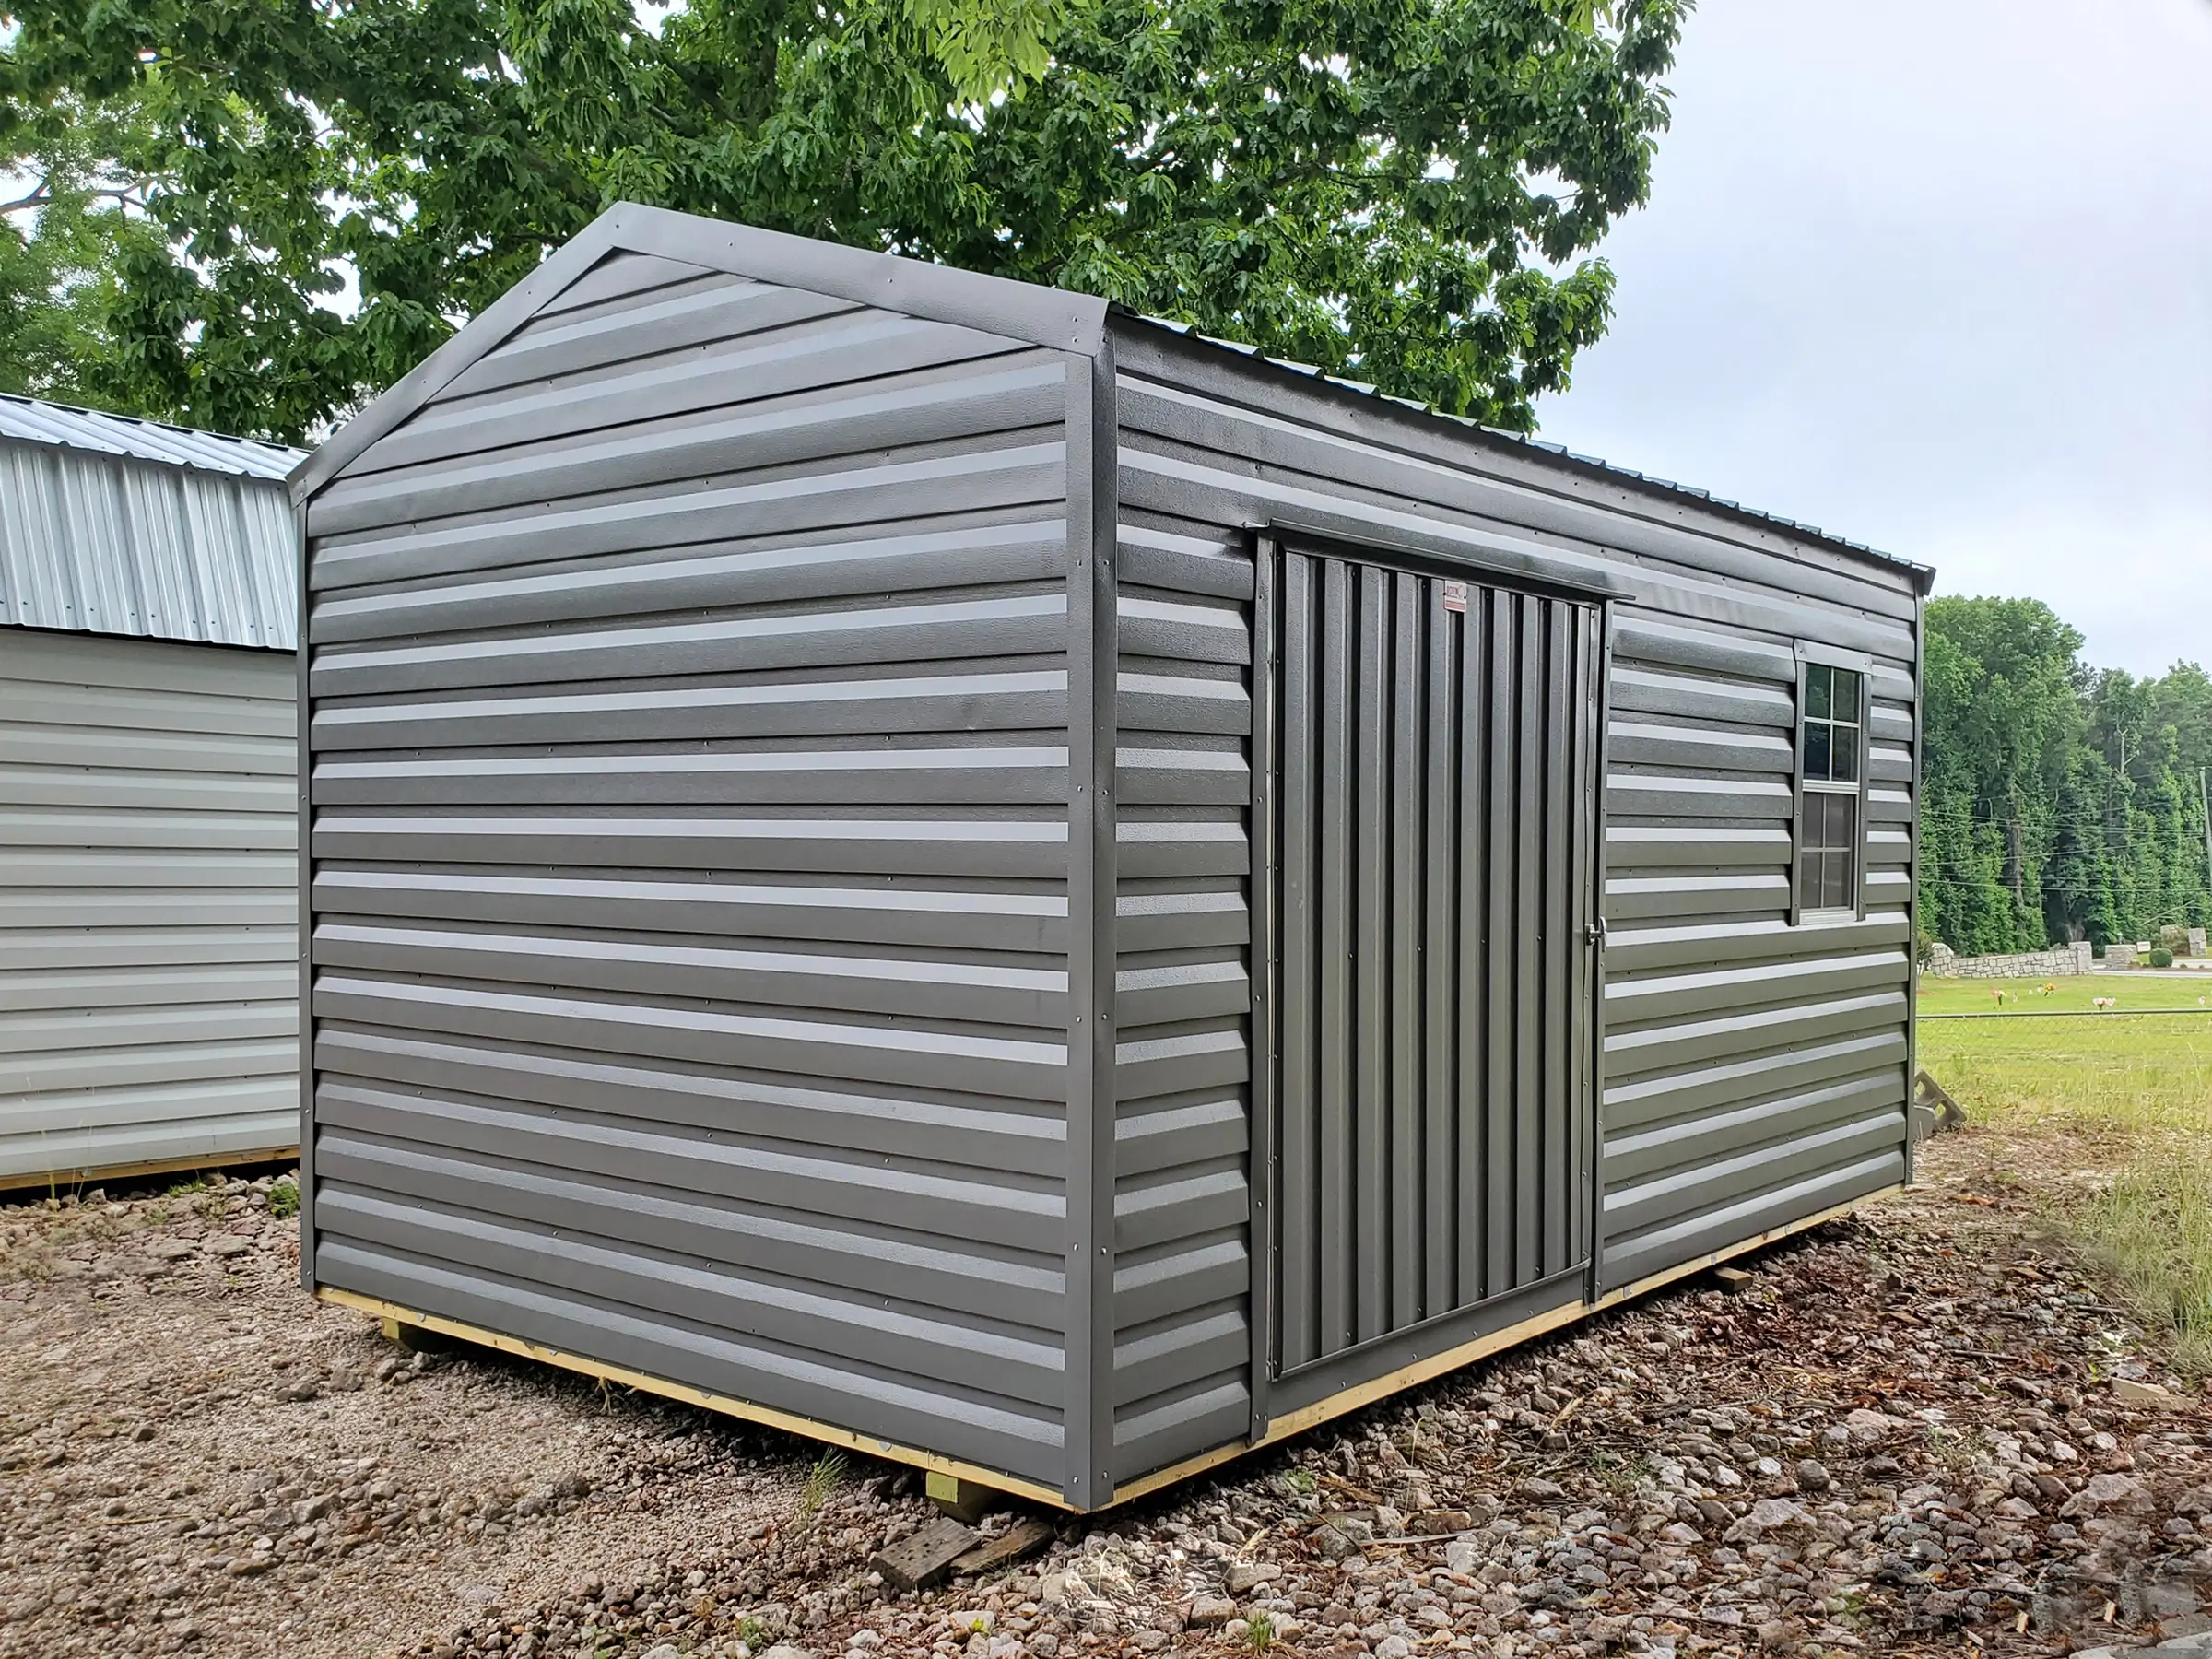 This all gray 10 by 16 portable shed building is equipped with a window and large door for riding mowers.